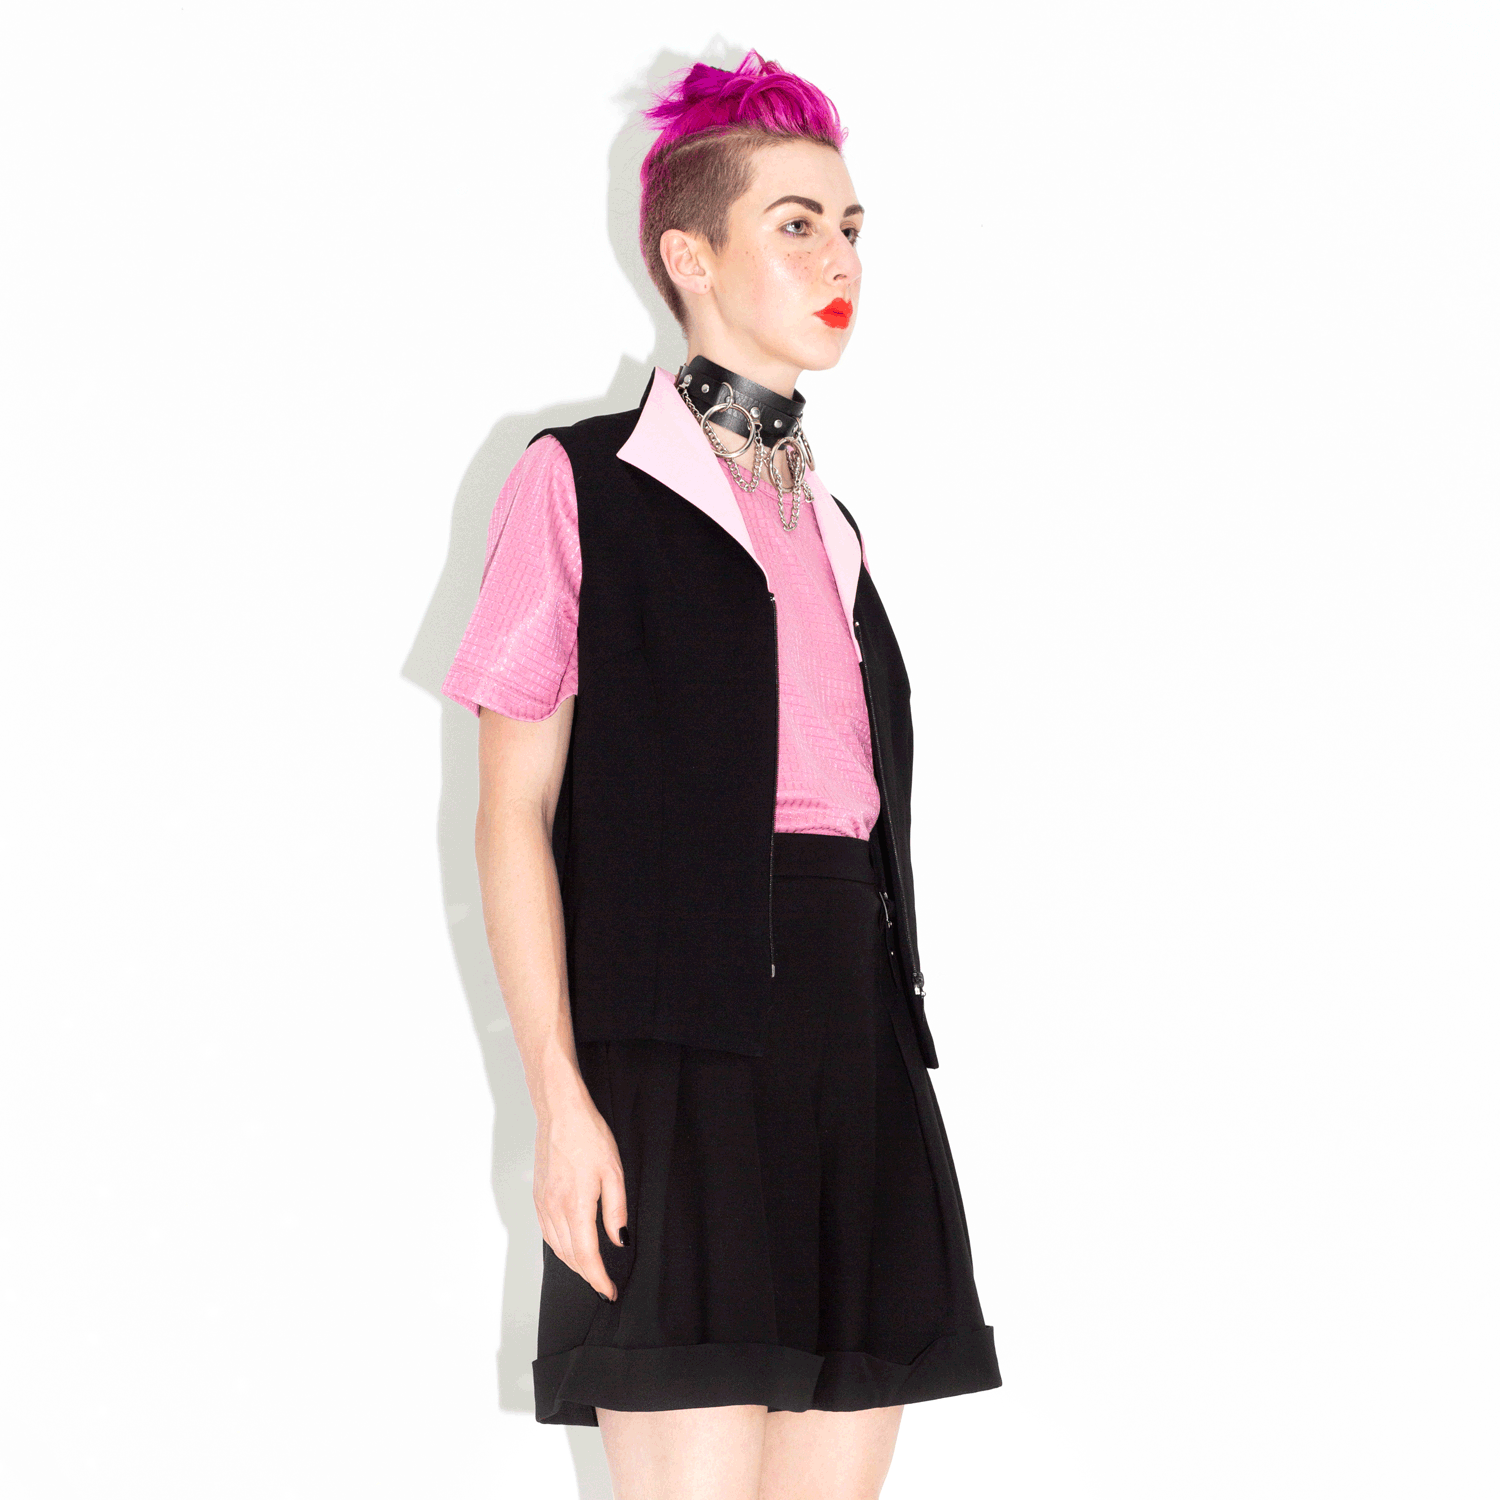 stop motion spinning model with edgy pink haircut wears pink shirt with black vest, black shorts, and chain choker collar